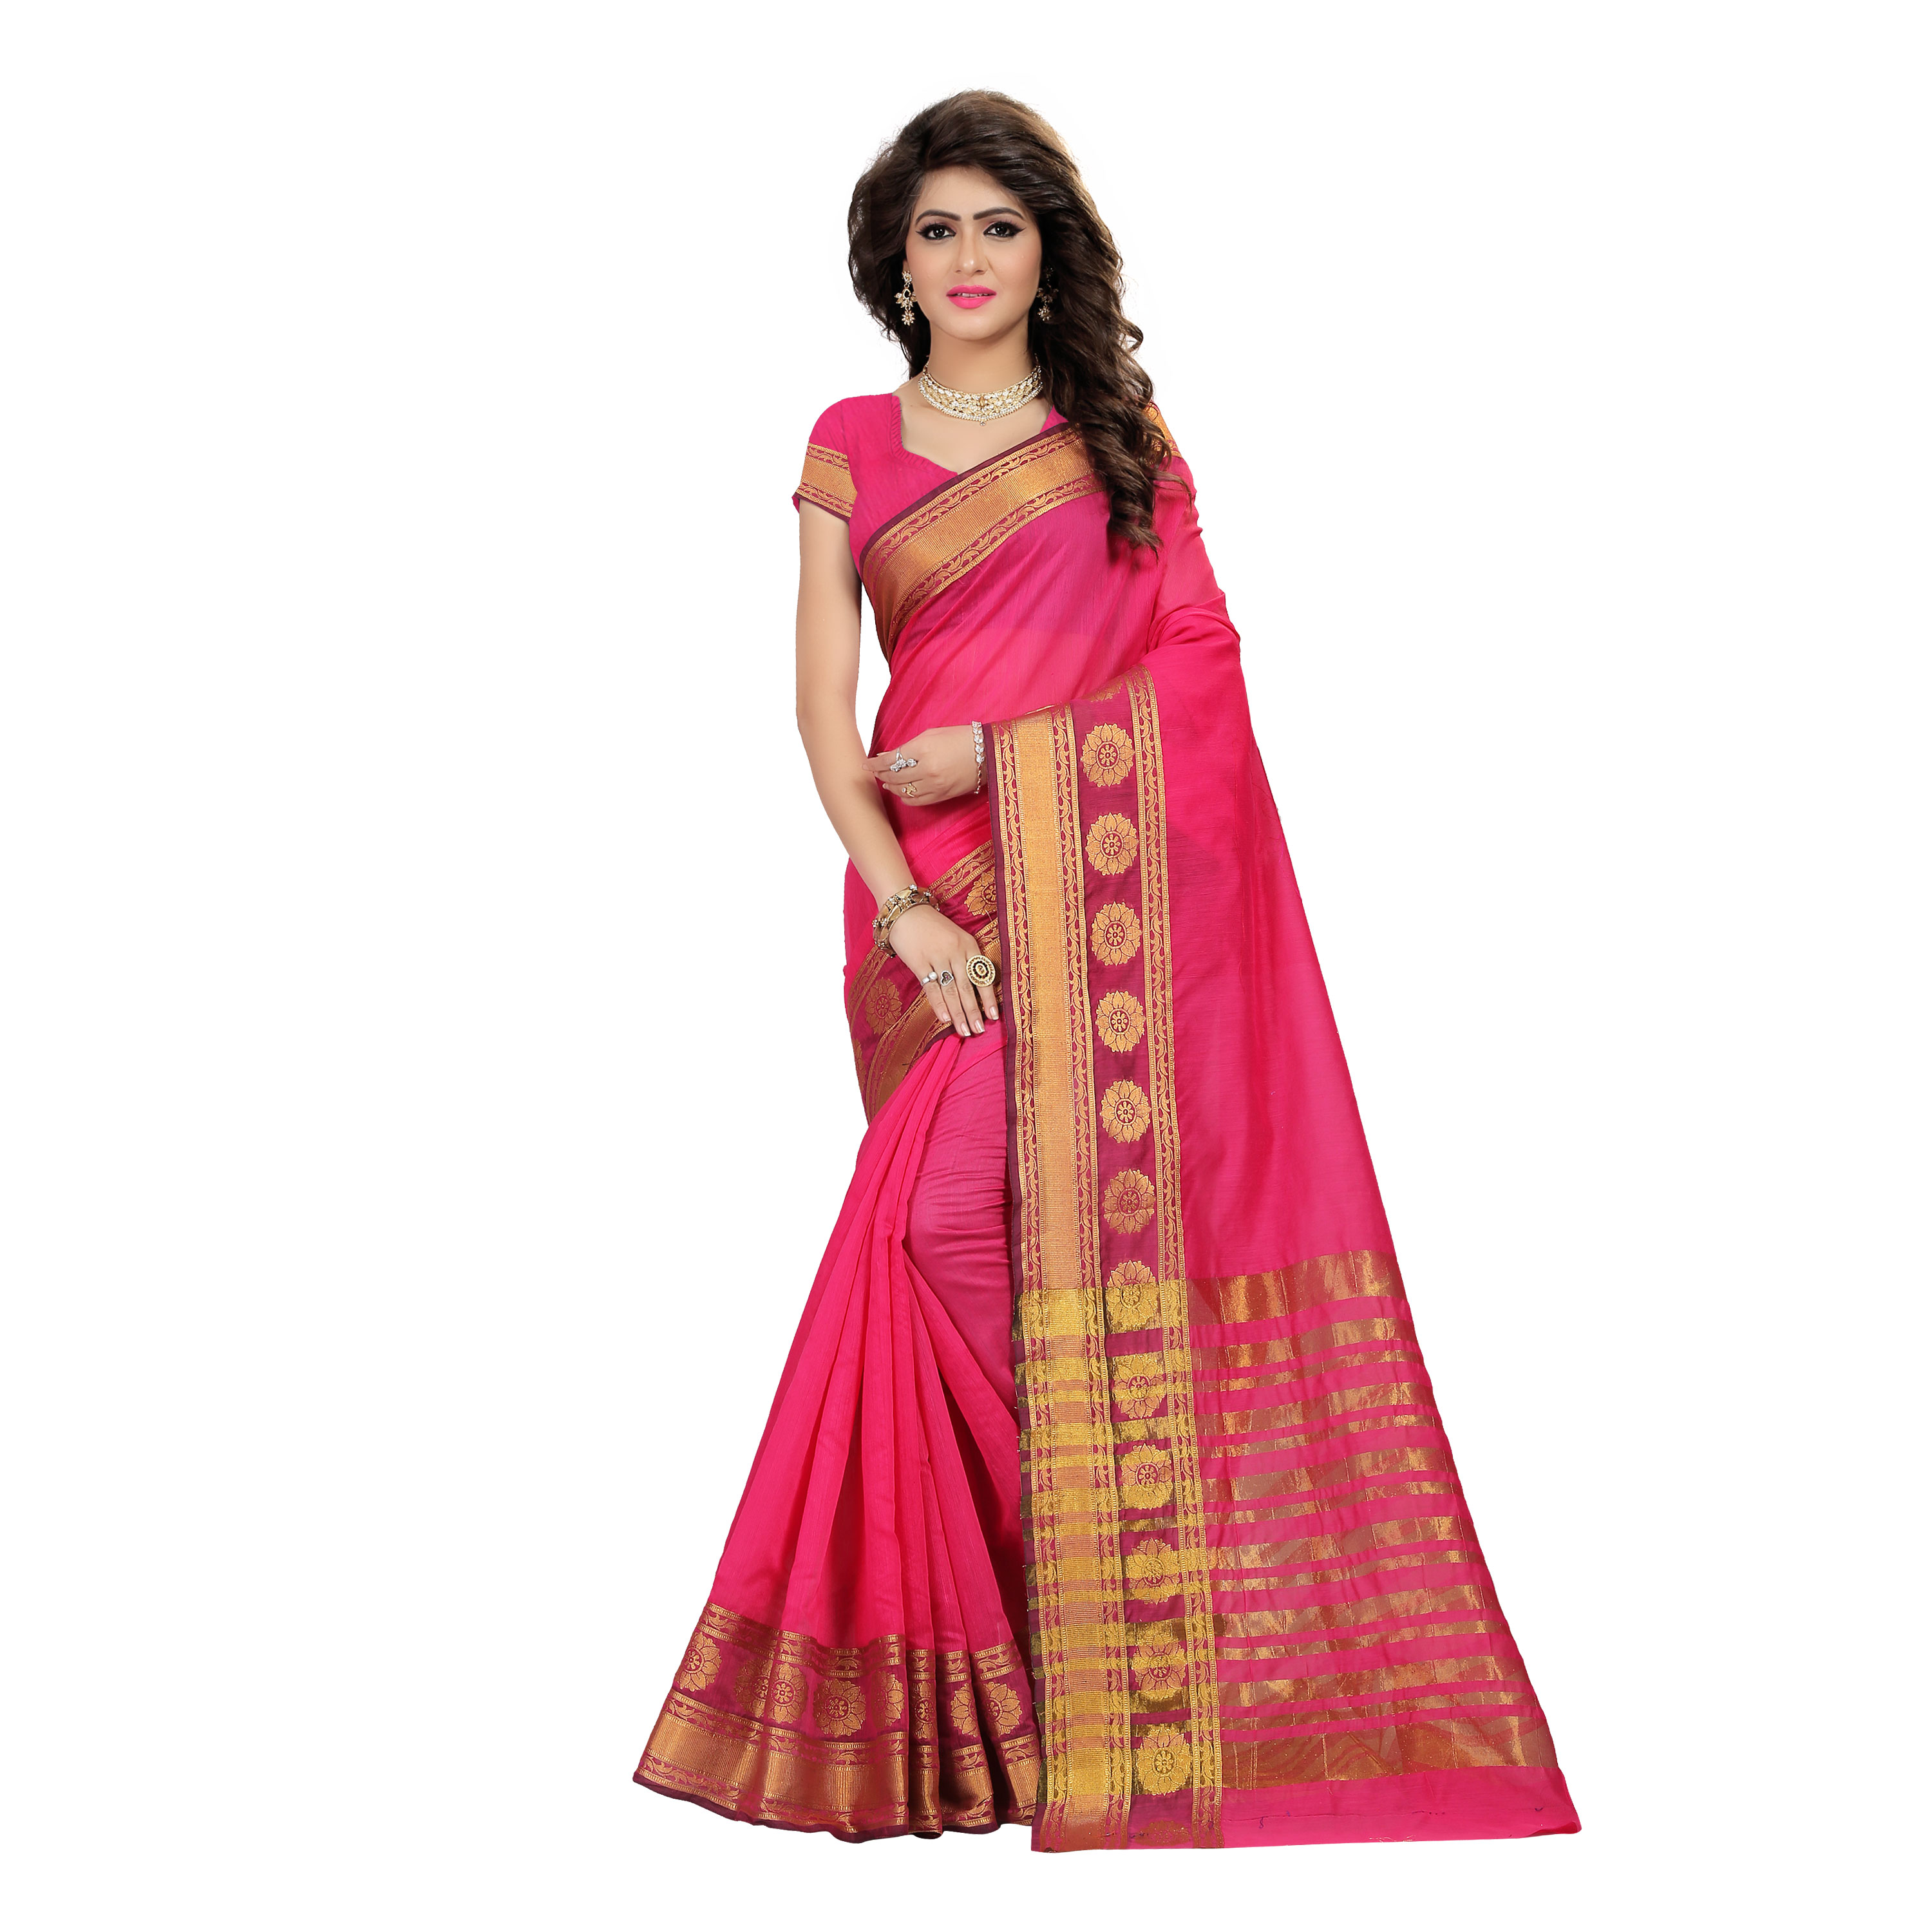 Buy Alankrutha Pink Color Cotton-Silk Saree With Blouse Online @ ₹689 ...